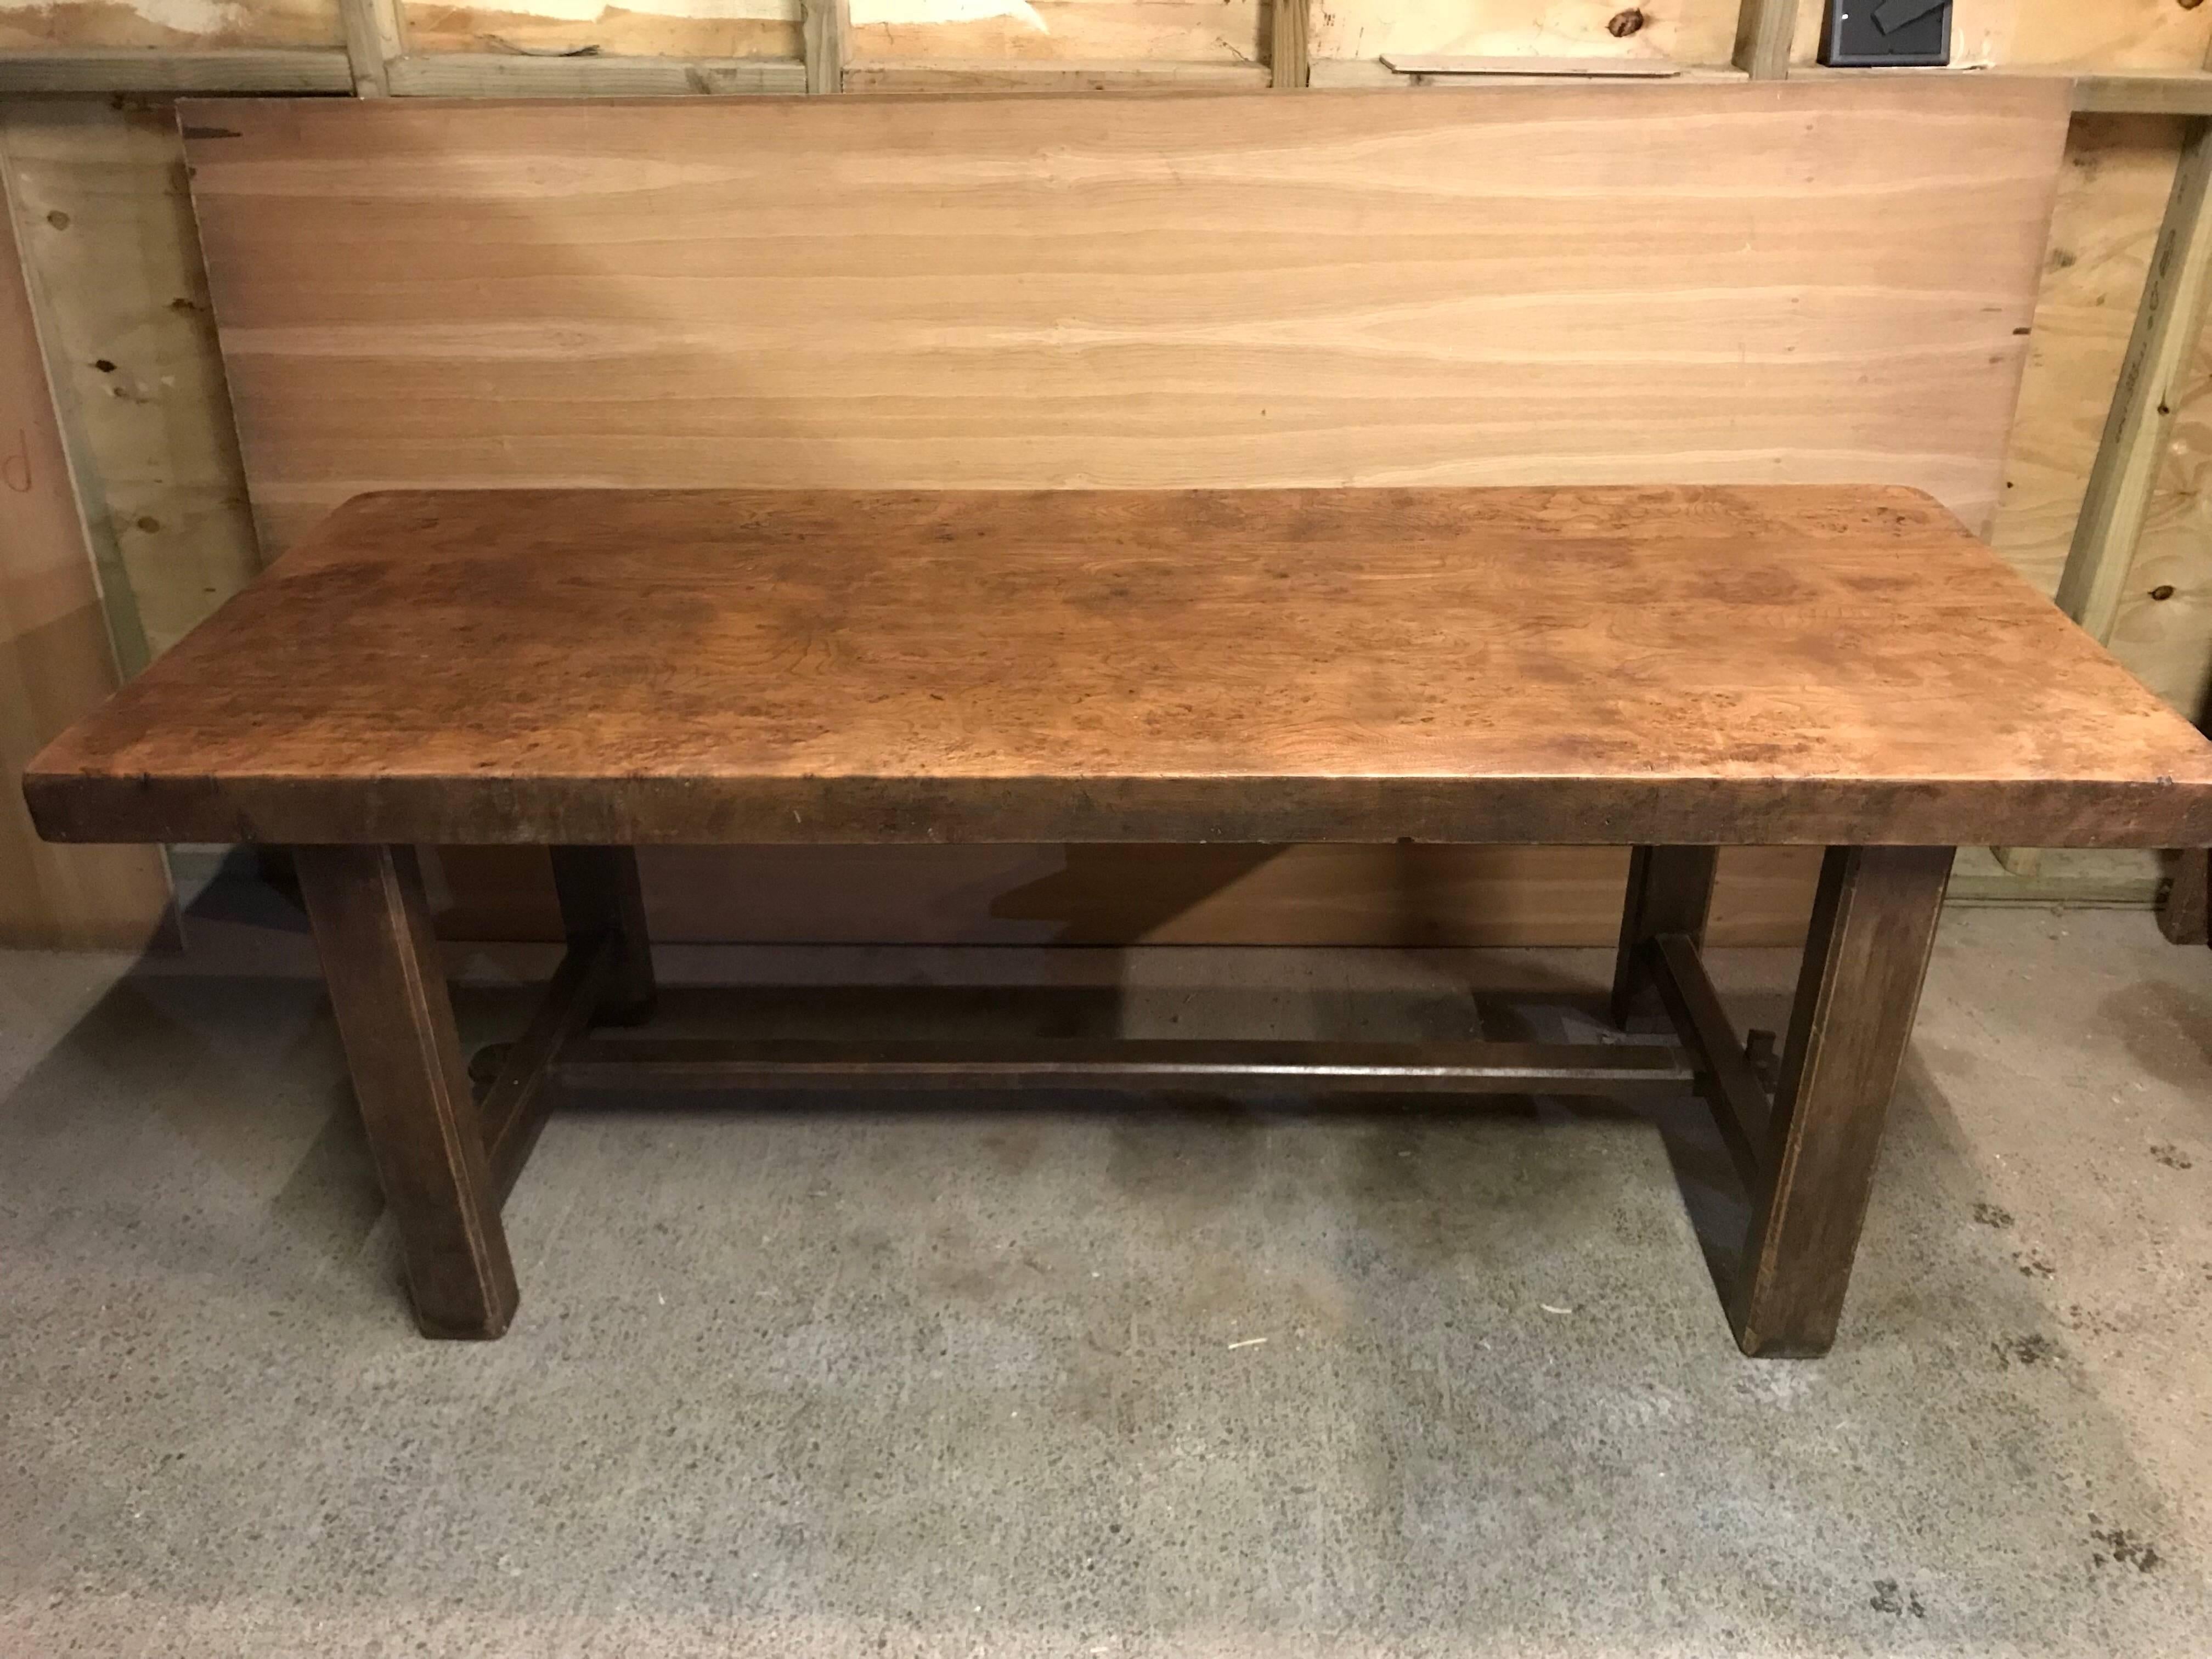 A beautiful 19th century thick top rustic elm farmhouse table with a glorious top. This table would look fabulous in most settings, with its rustic feel and well figured top. The table seats up to 8 people comfortably. Very sturdy base and gorgeous